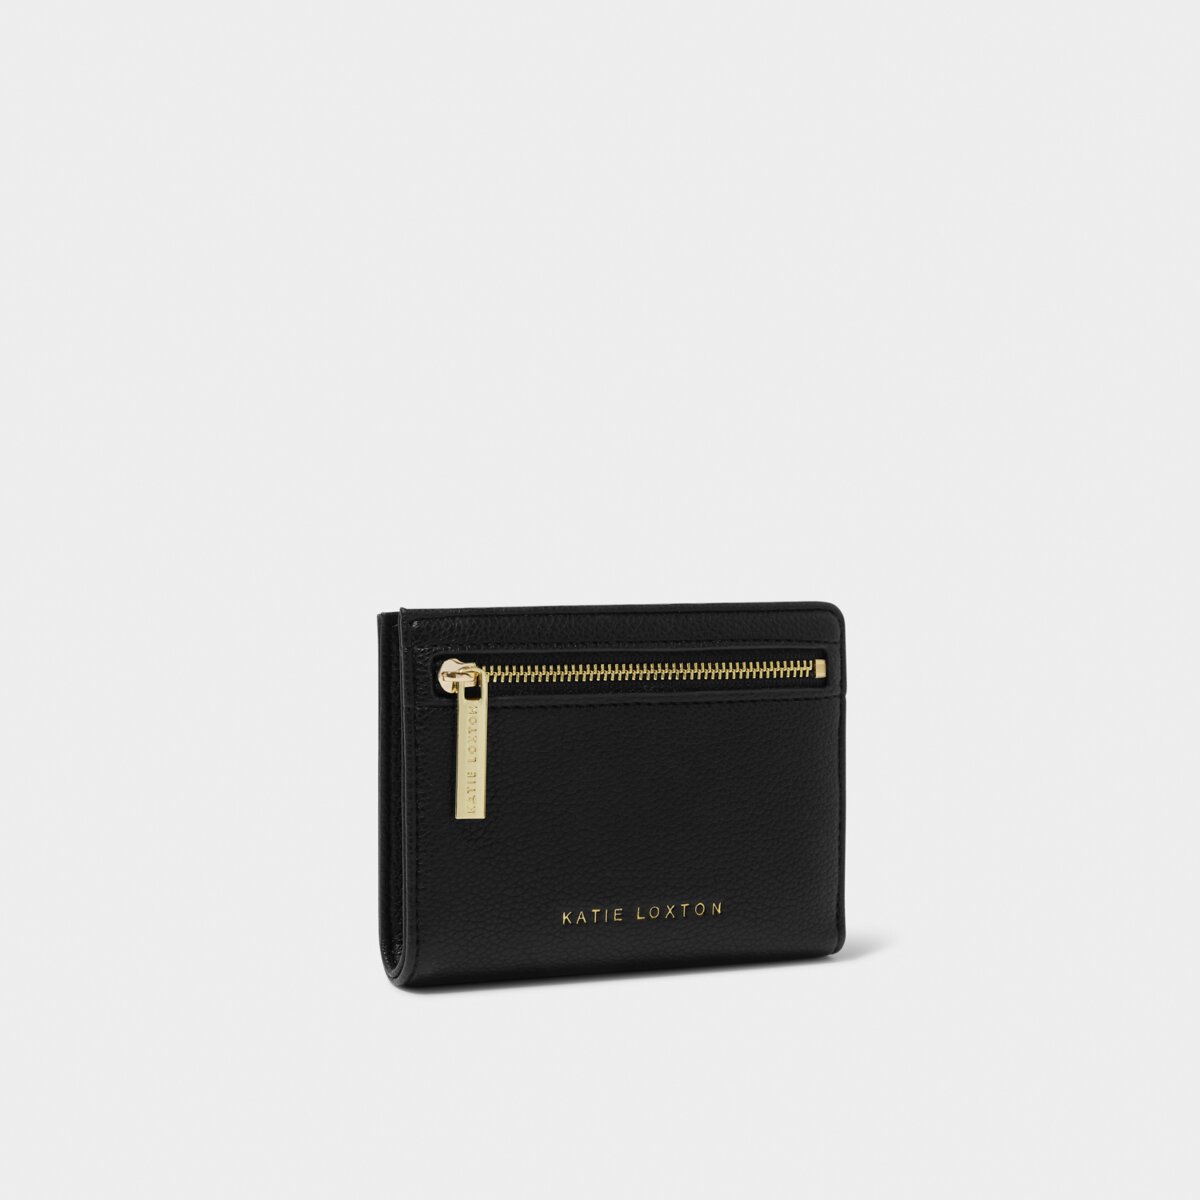 small rectangular purse against a white background. The purse has a gold zip at the top edge and Katie Loxton in gold foil print embossed along the bottom edge.